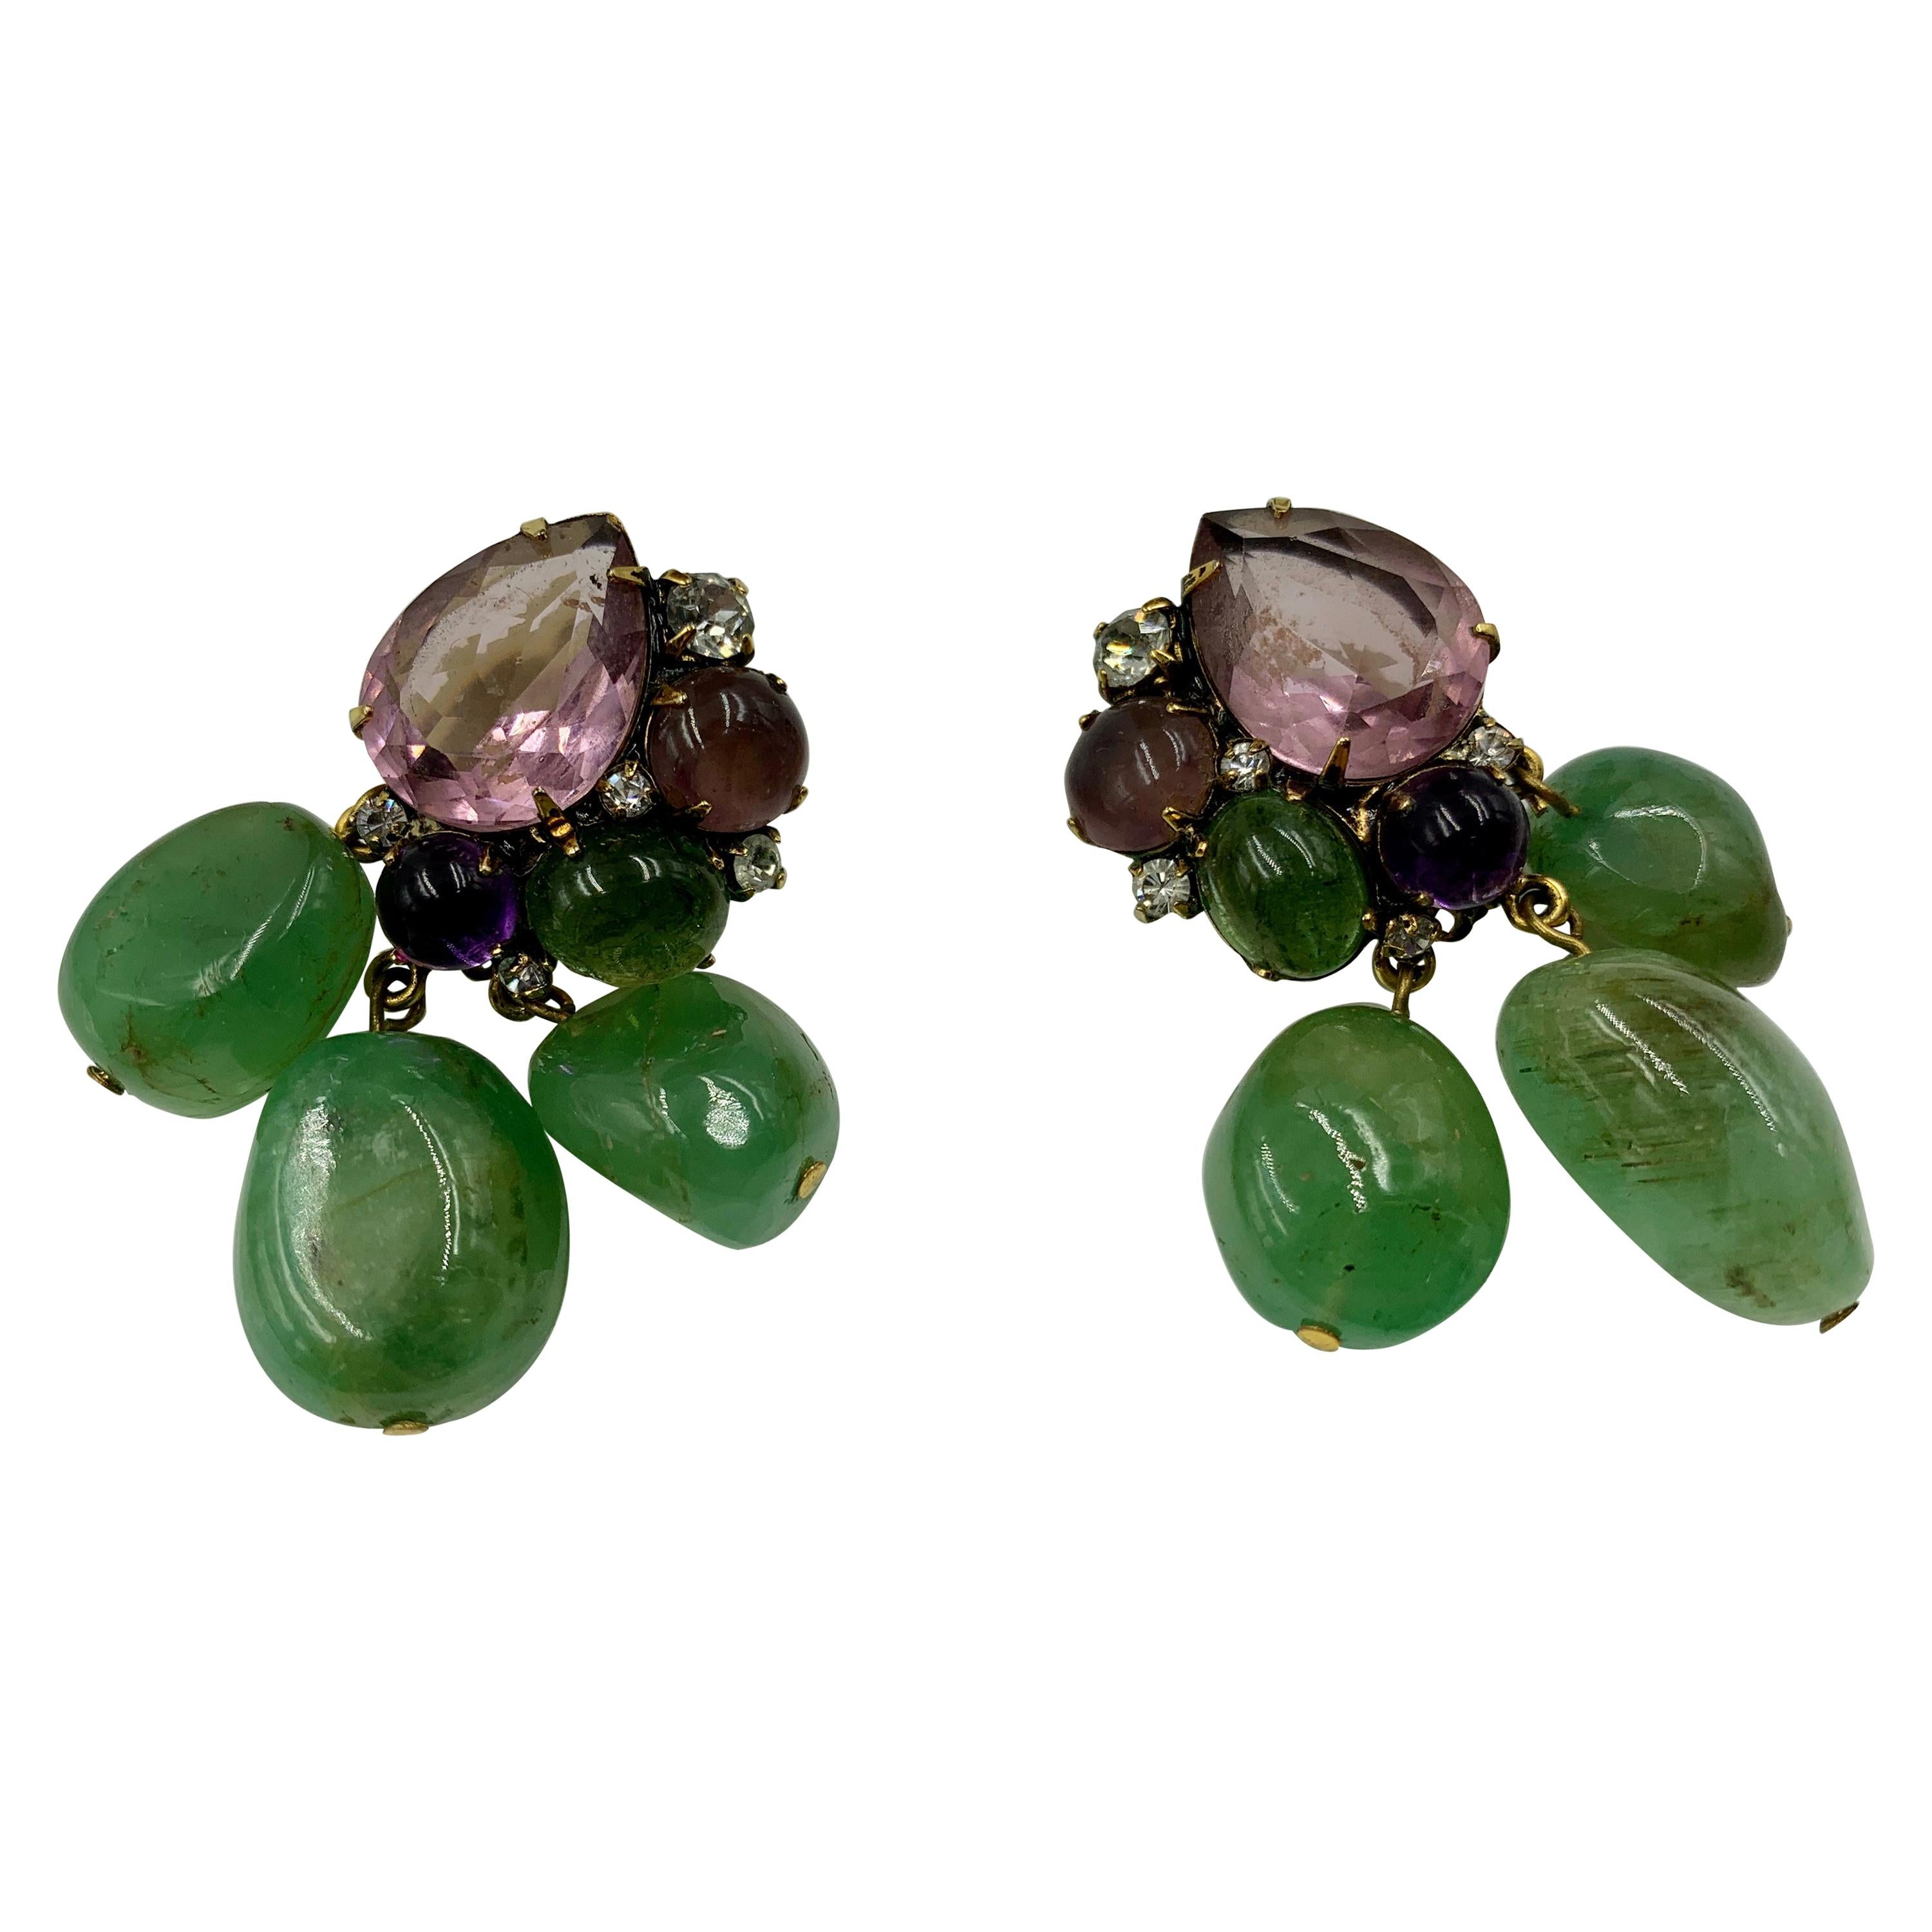 Vintage Iradj Moini Amethyst, Fluorite and Crystal Ear Clips, late 20th Century